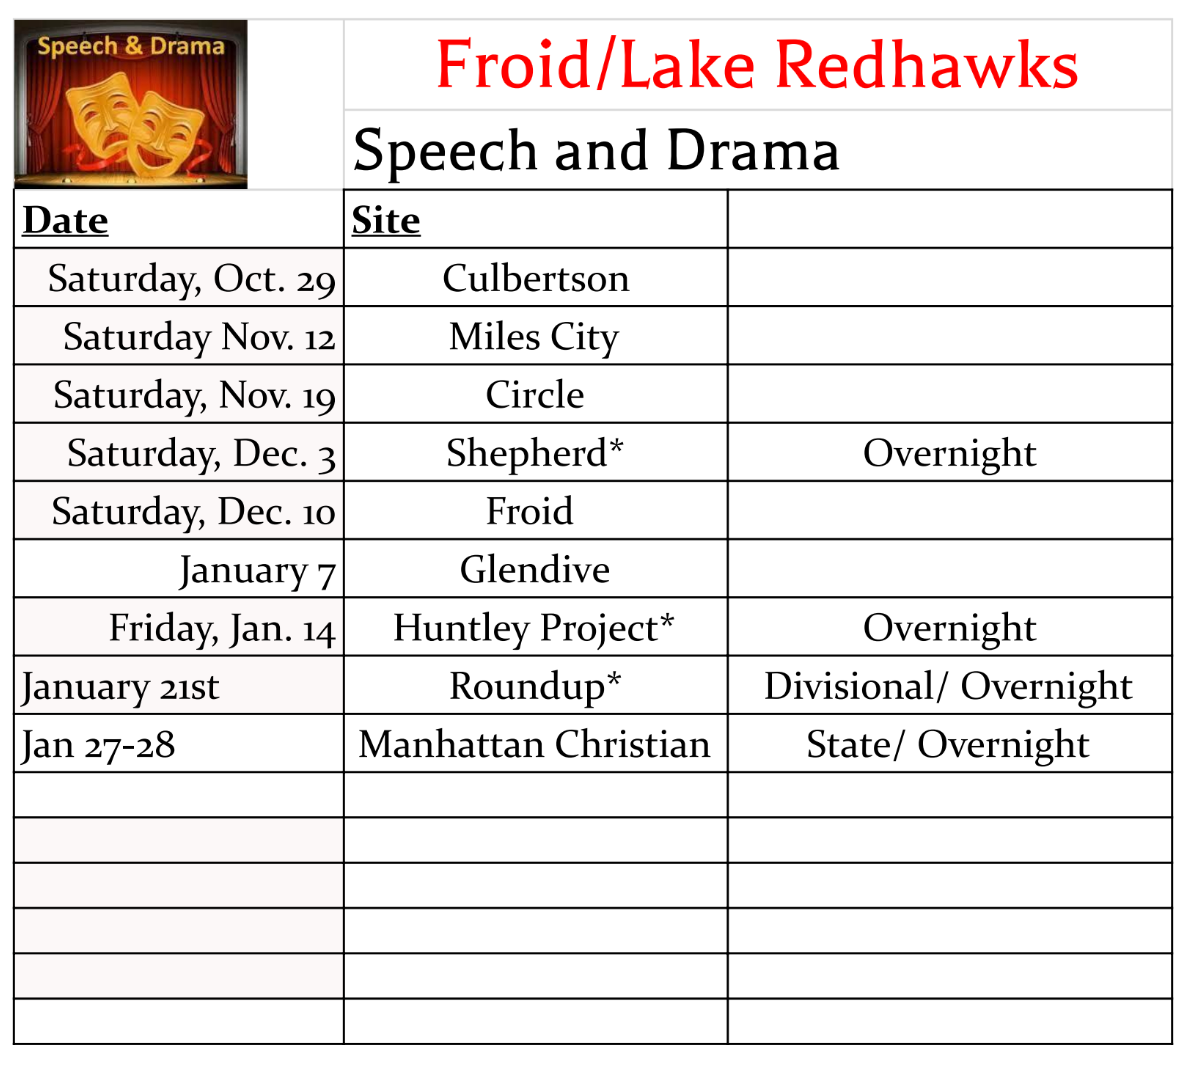 Click here to download the Speech and Drama schedule